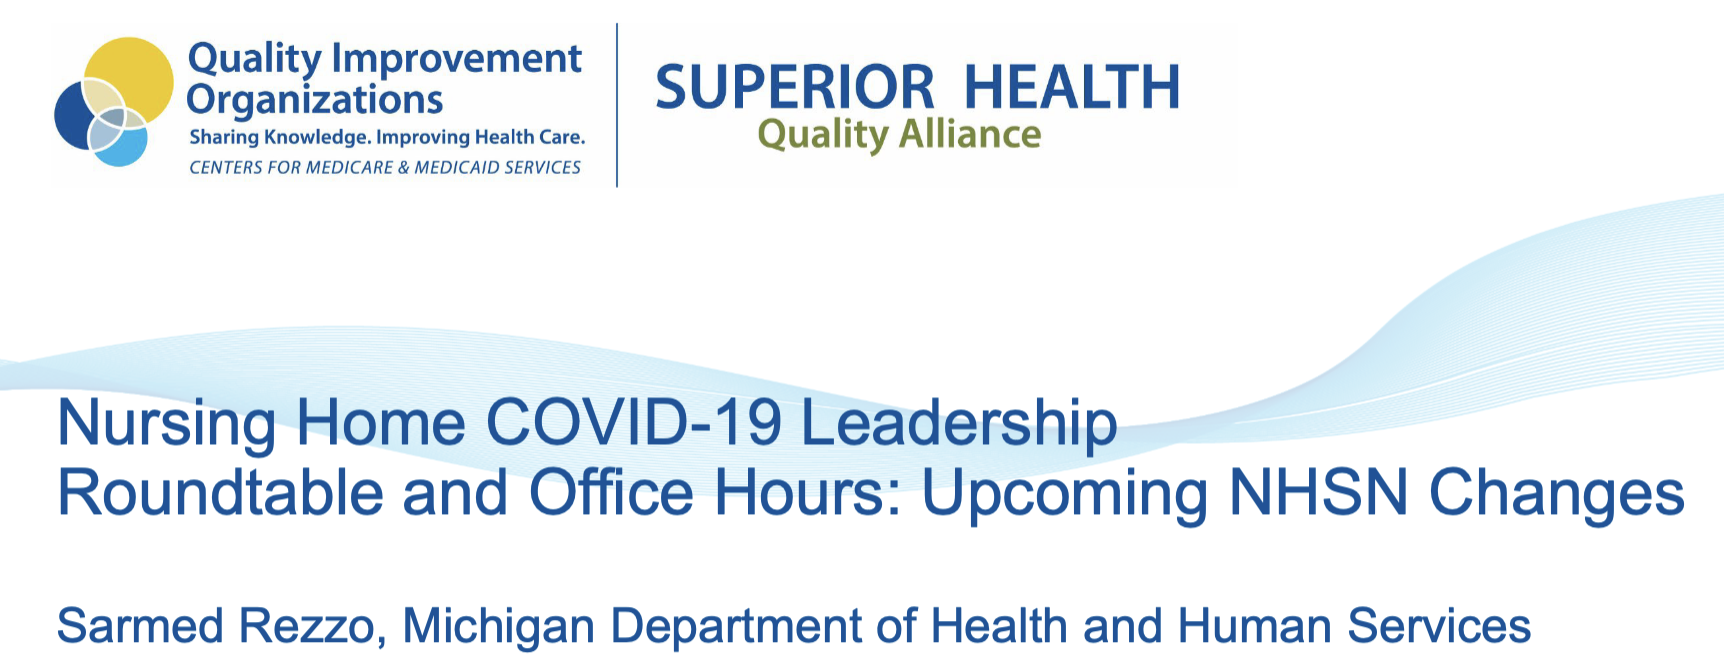 Nursing Home COVID-19 Leadership Roundtable and Office Hours: Upcoming NHSN Changes